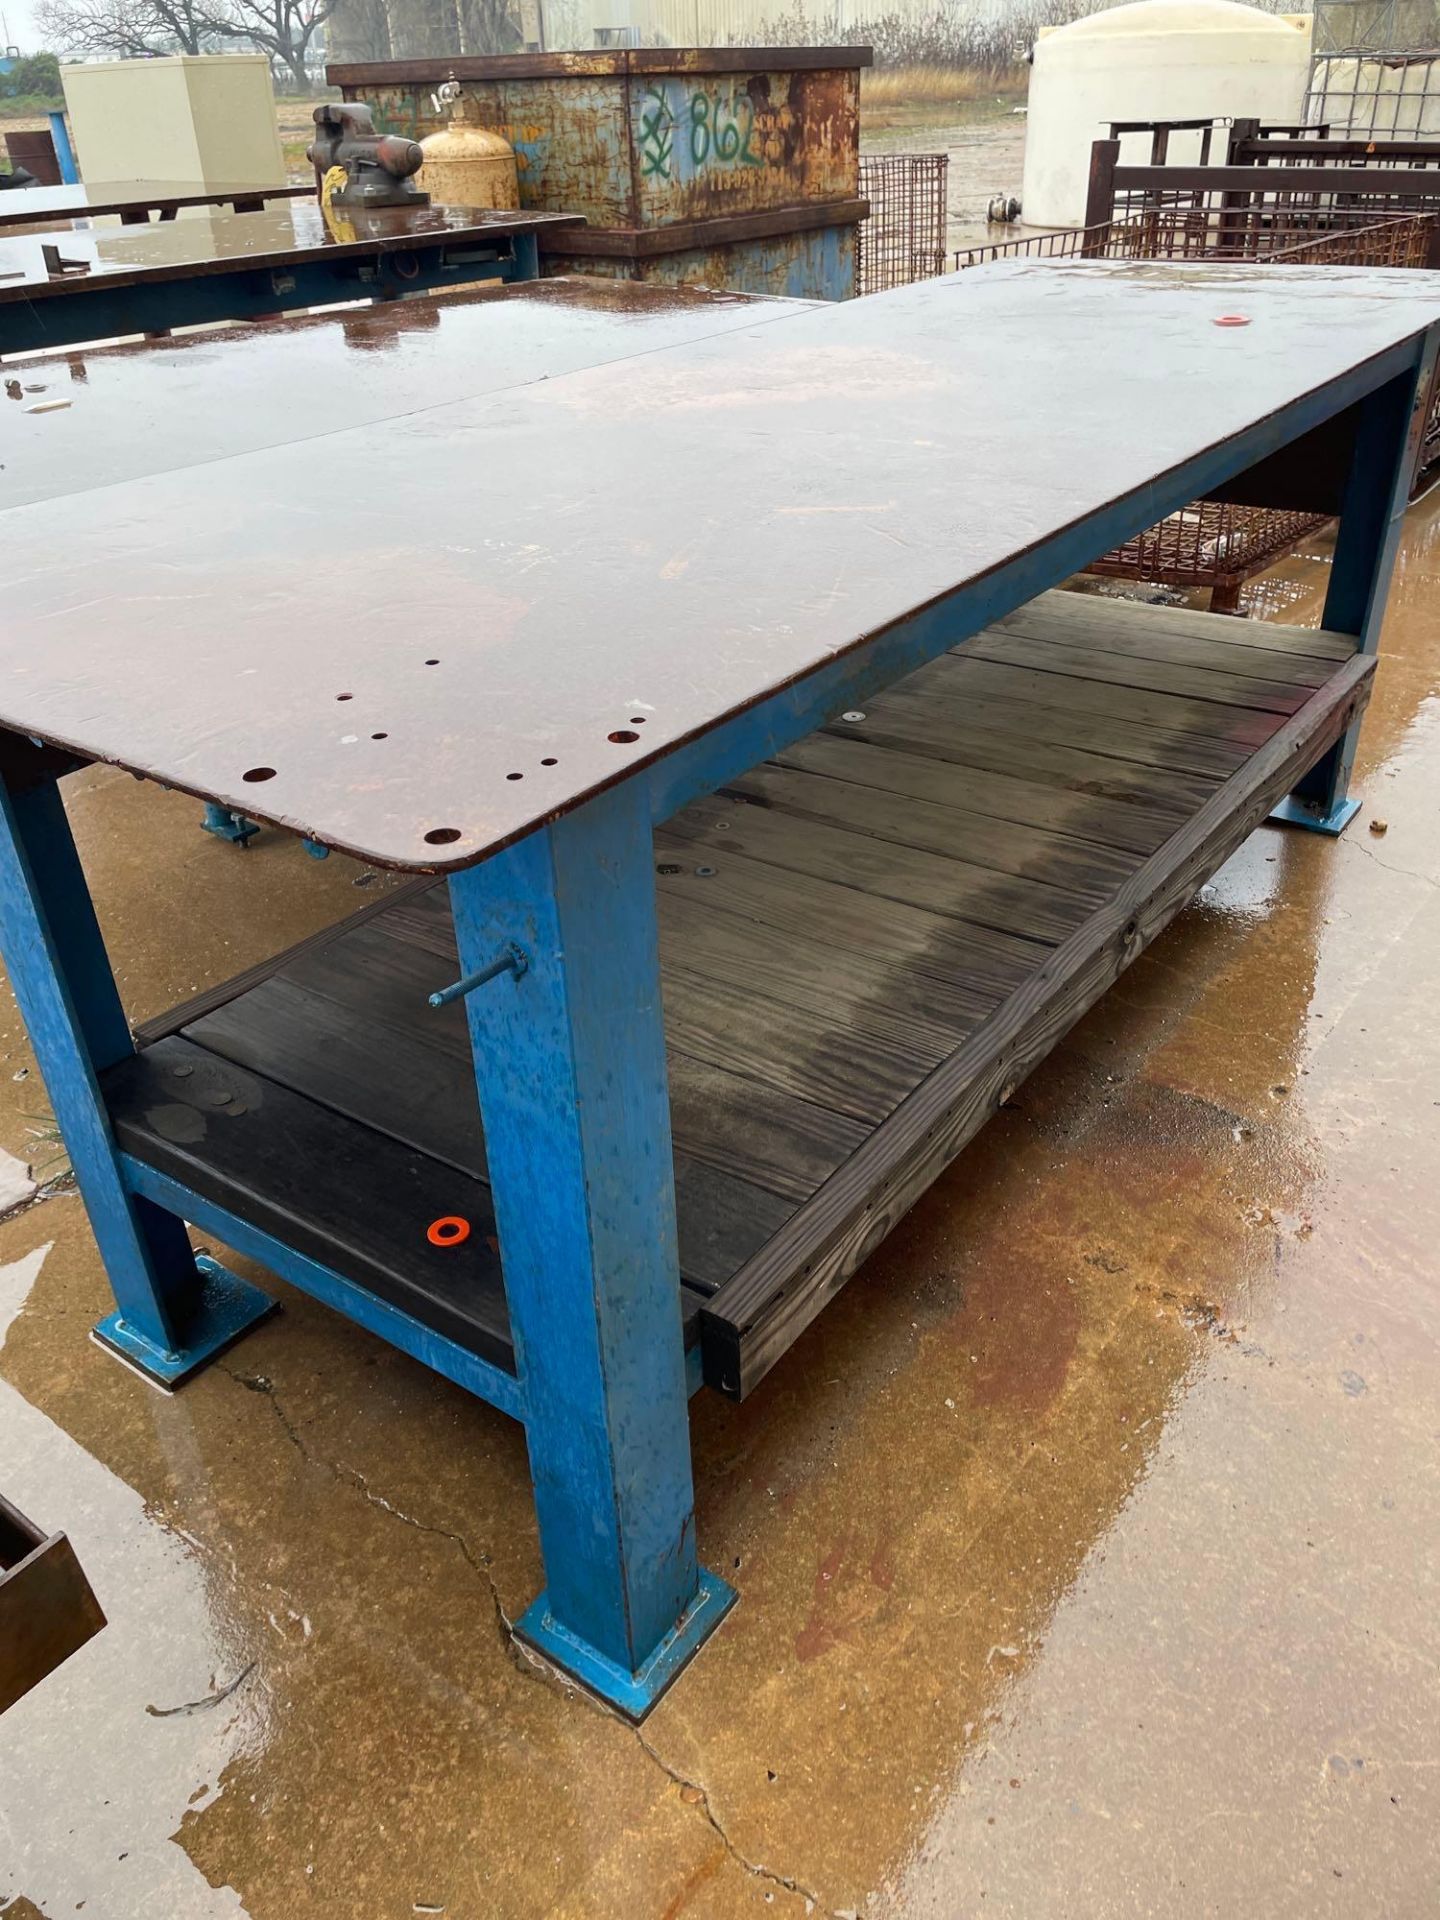 Heavy Duty Metal Table 96” X 36 ” X 36”, with 1/4” Thickness - Image 4 of 4